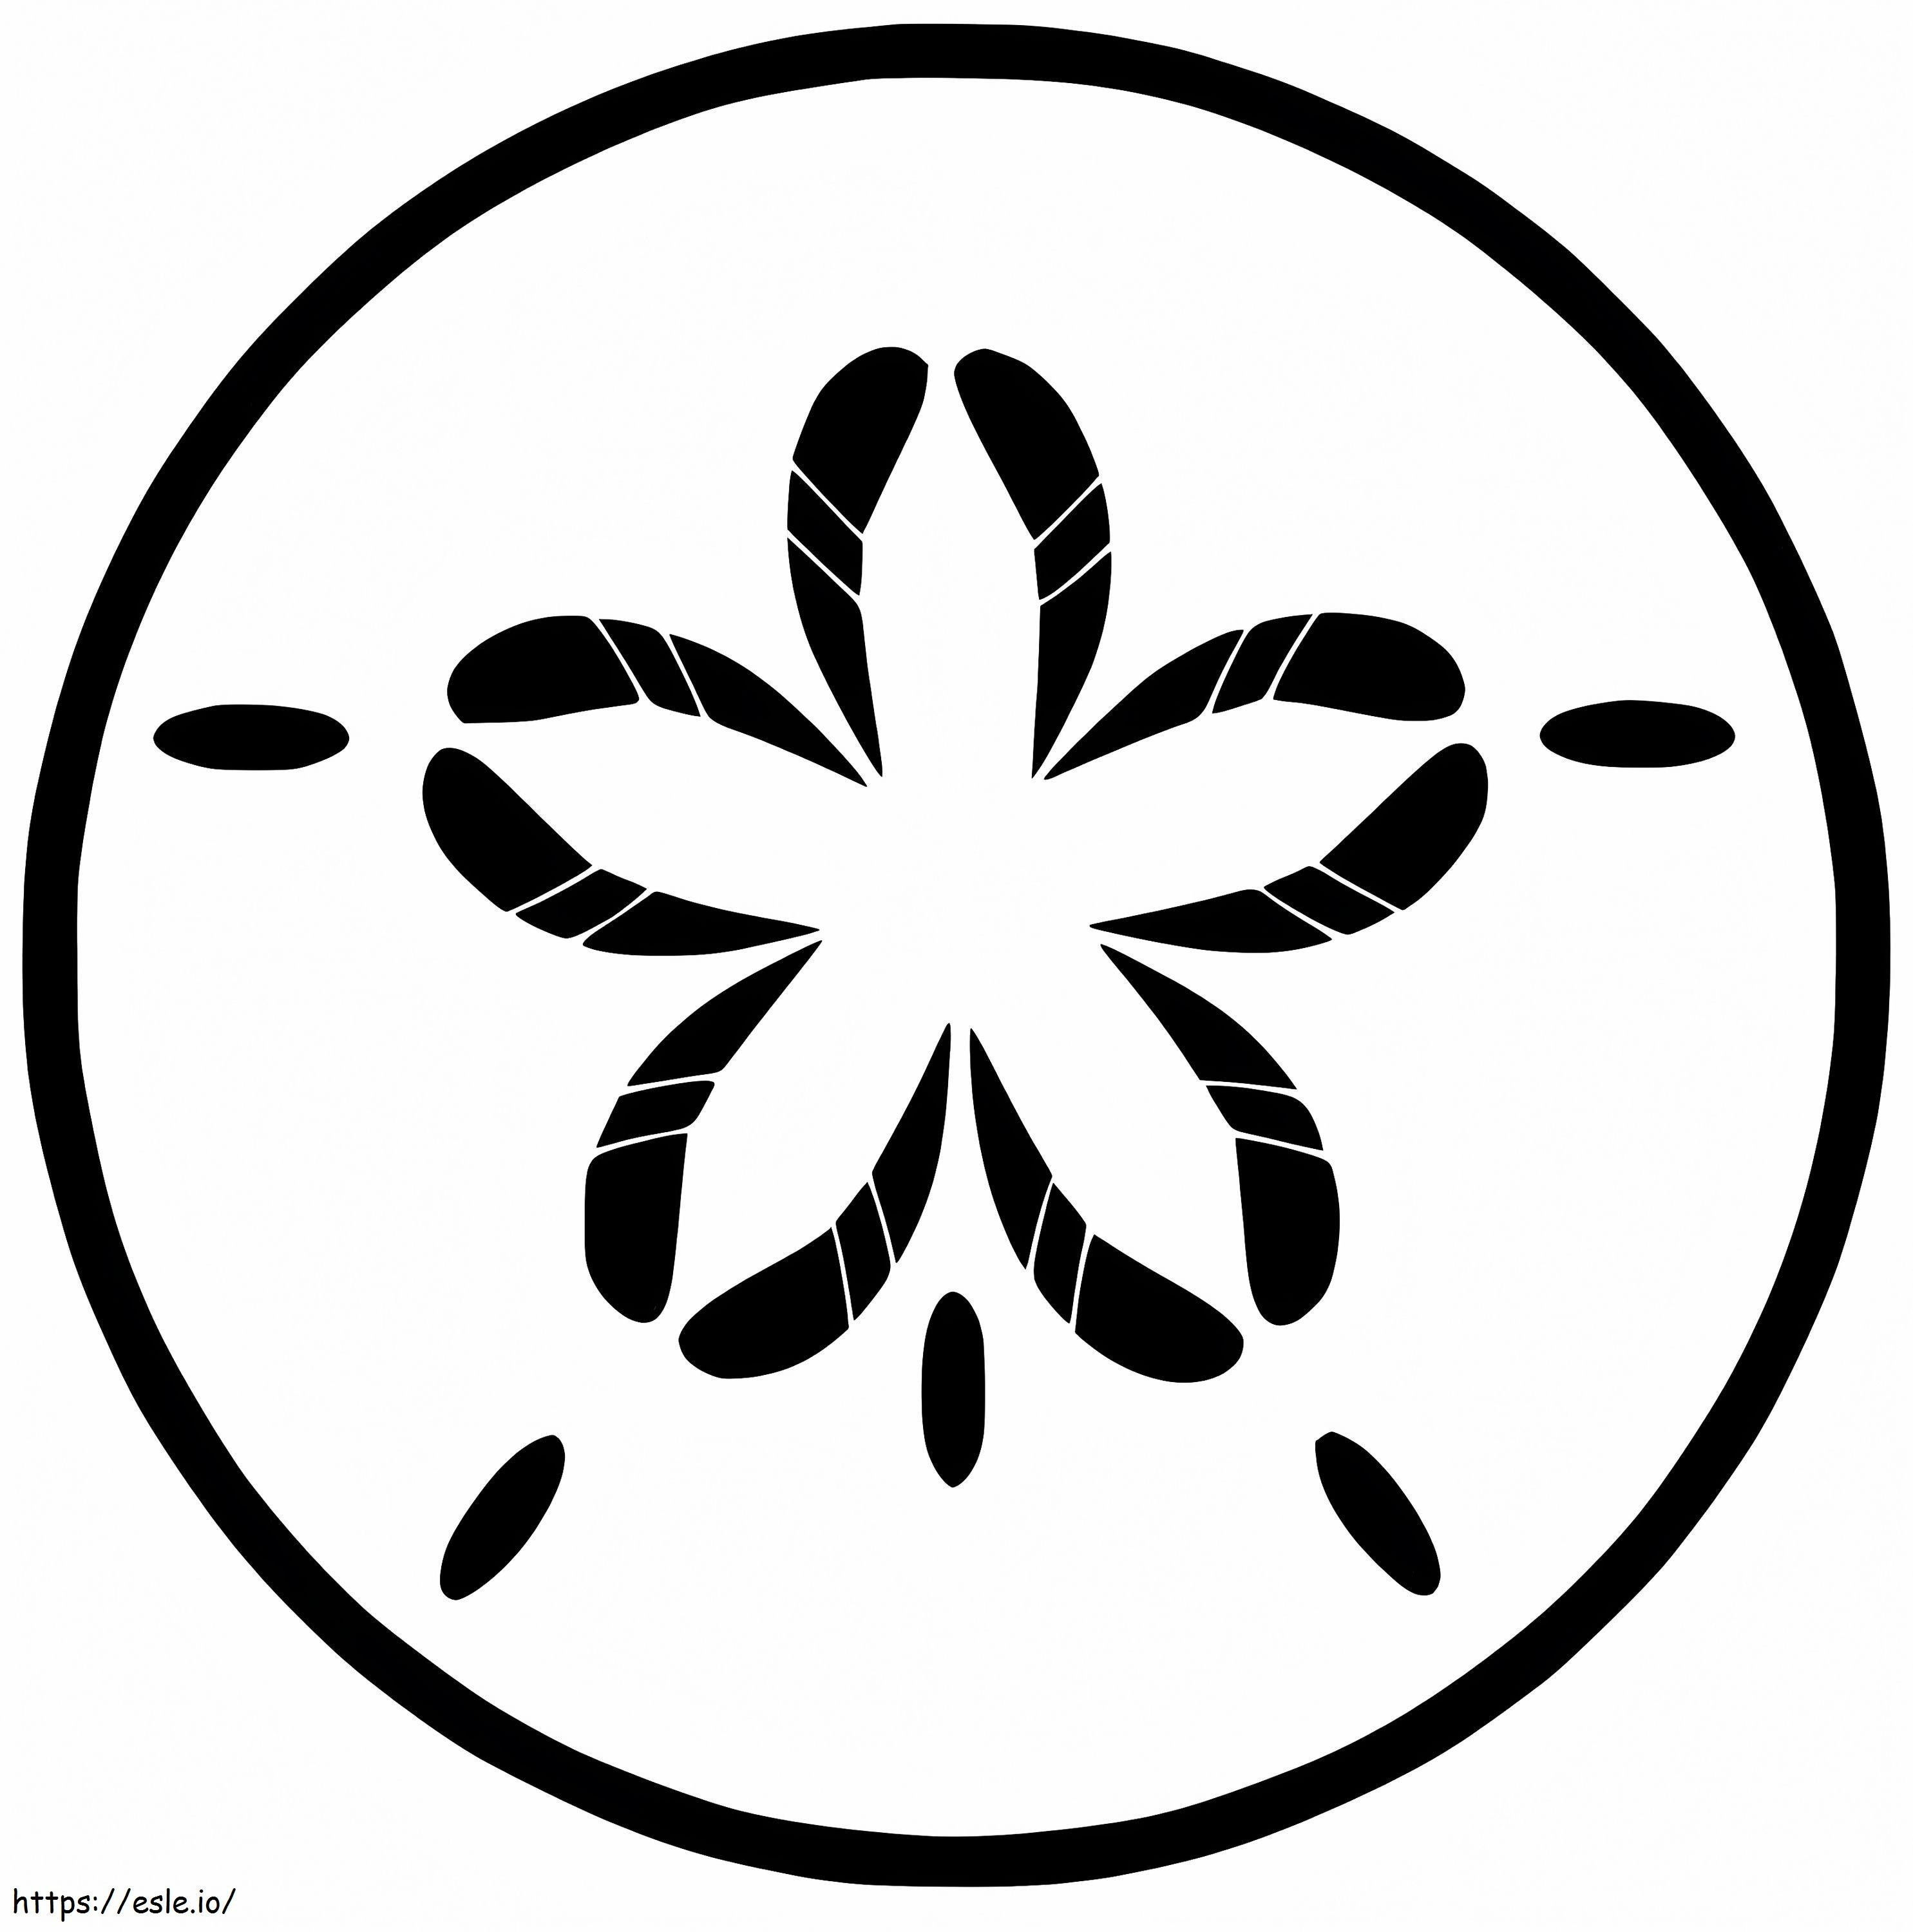 Sand Dollar 2 coloring page